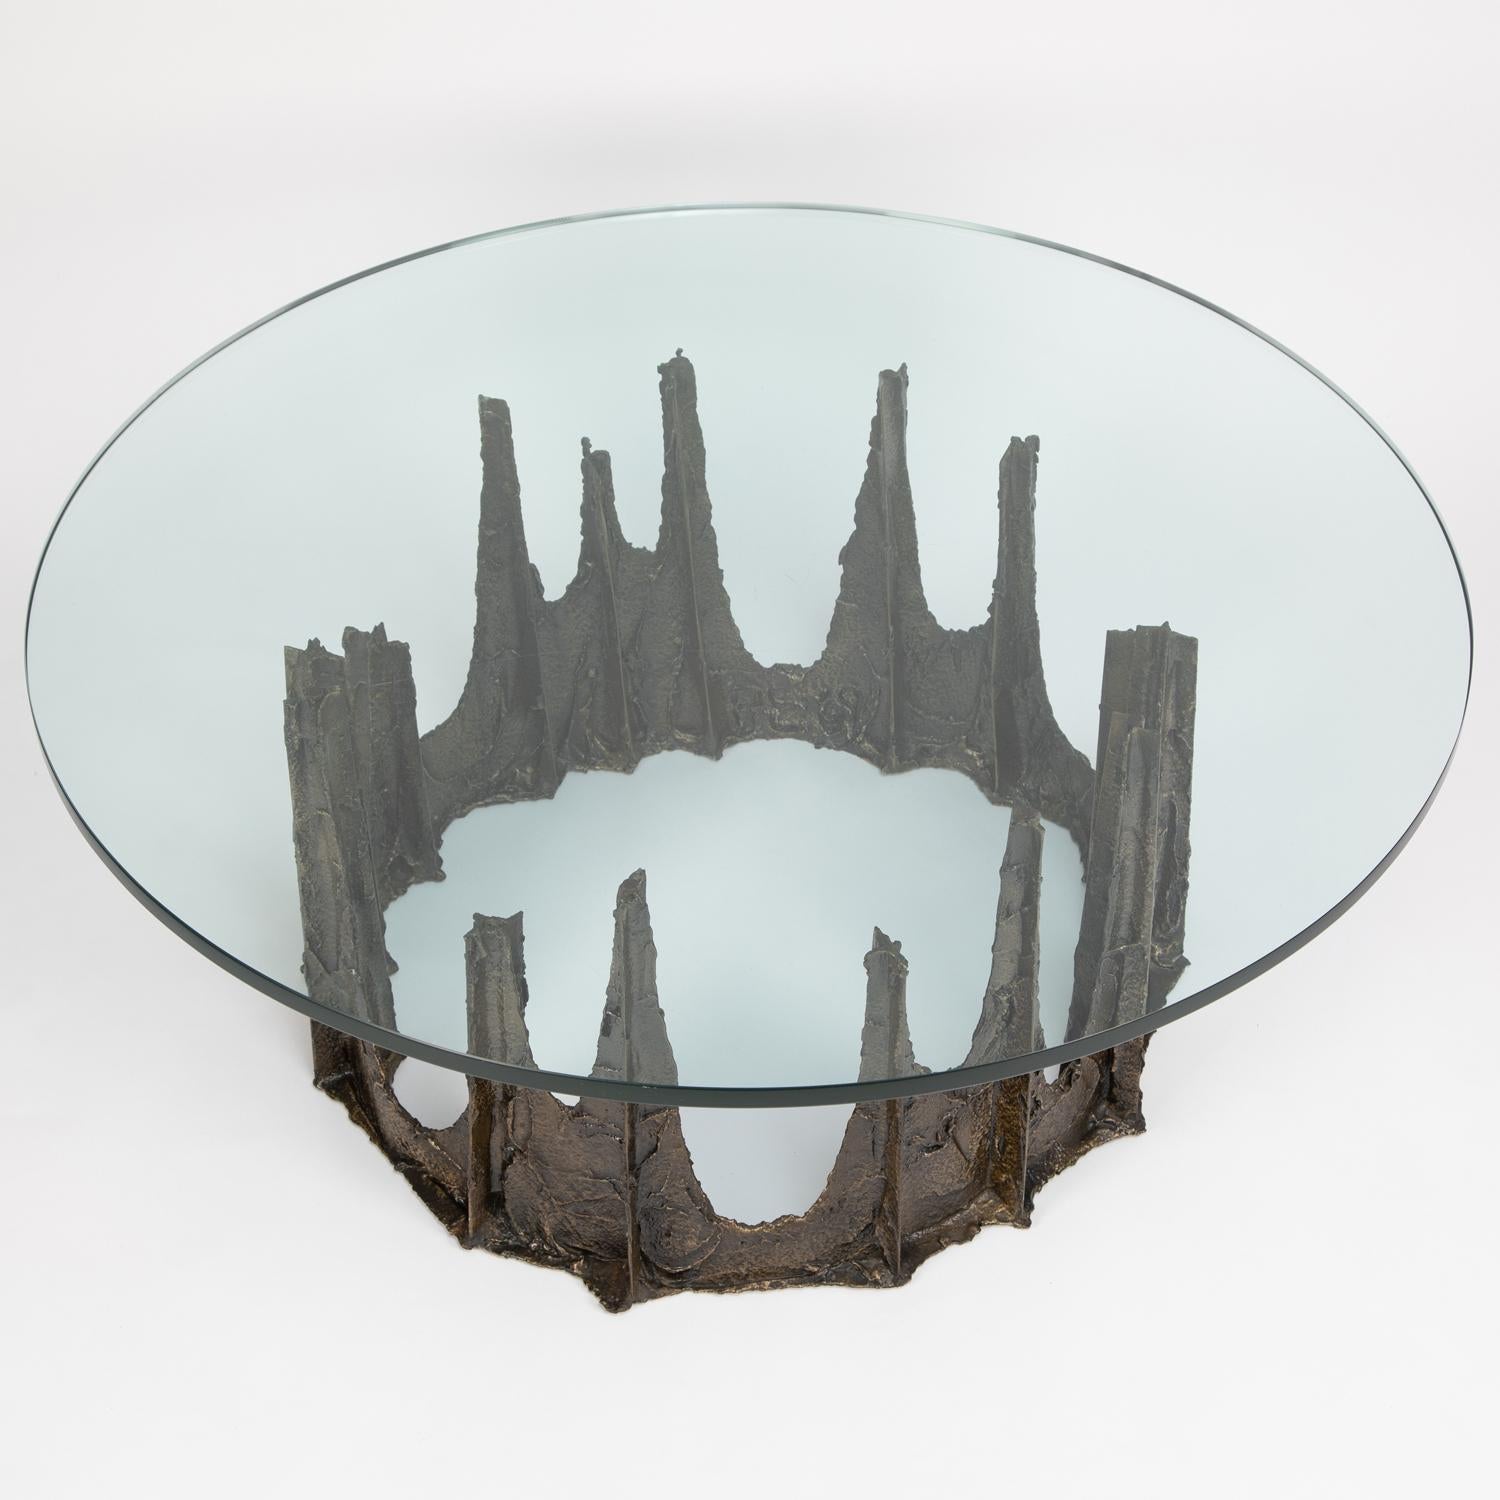 Round stalagmite coffee table in sculpted bronze by Paul Evans for Directional Furniture, American 1969 (signed 